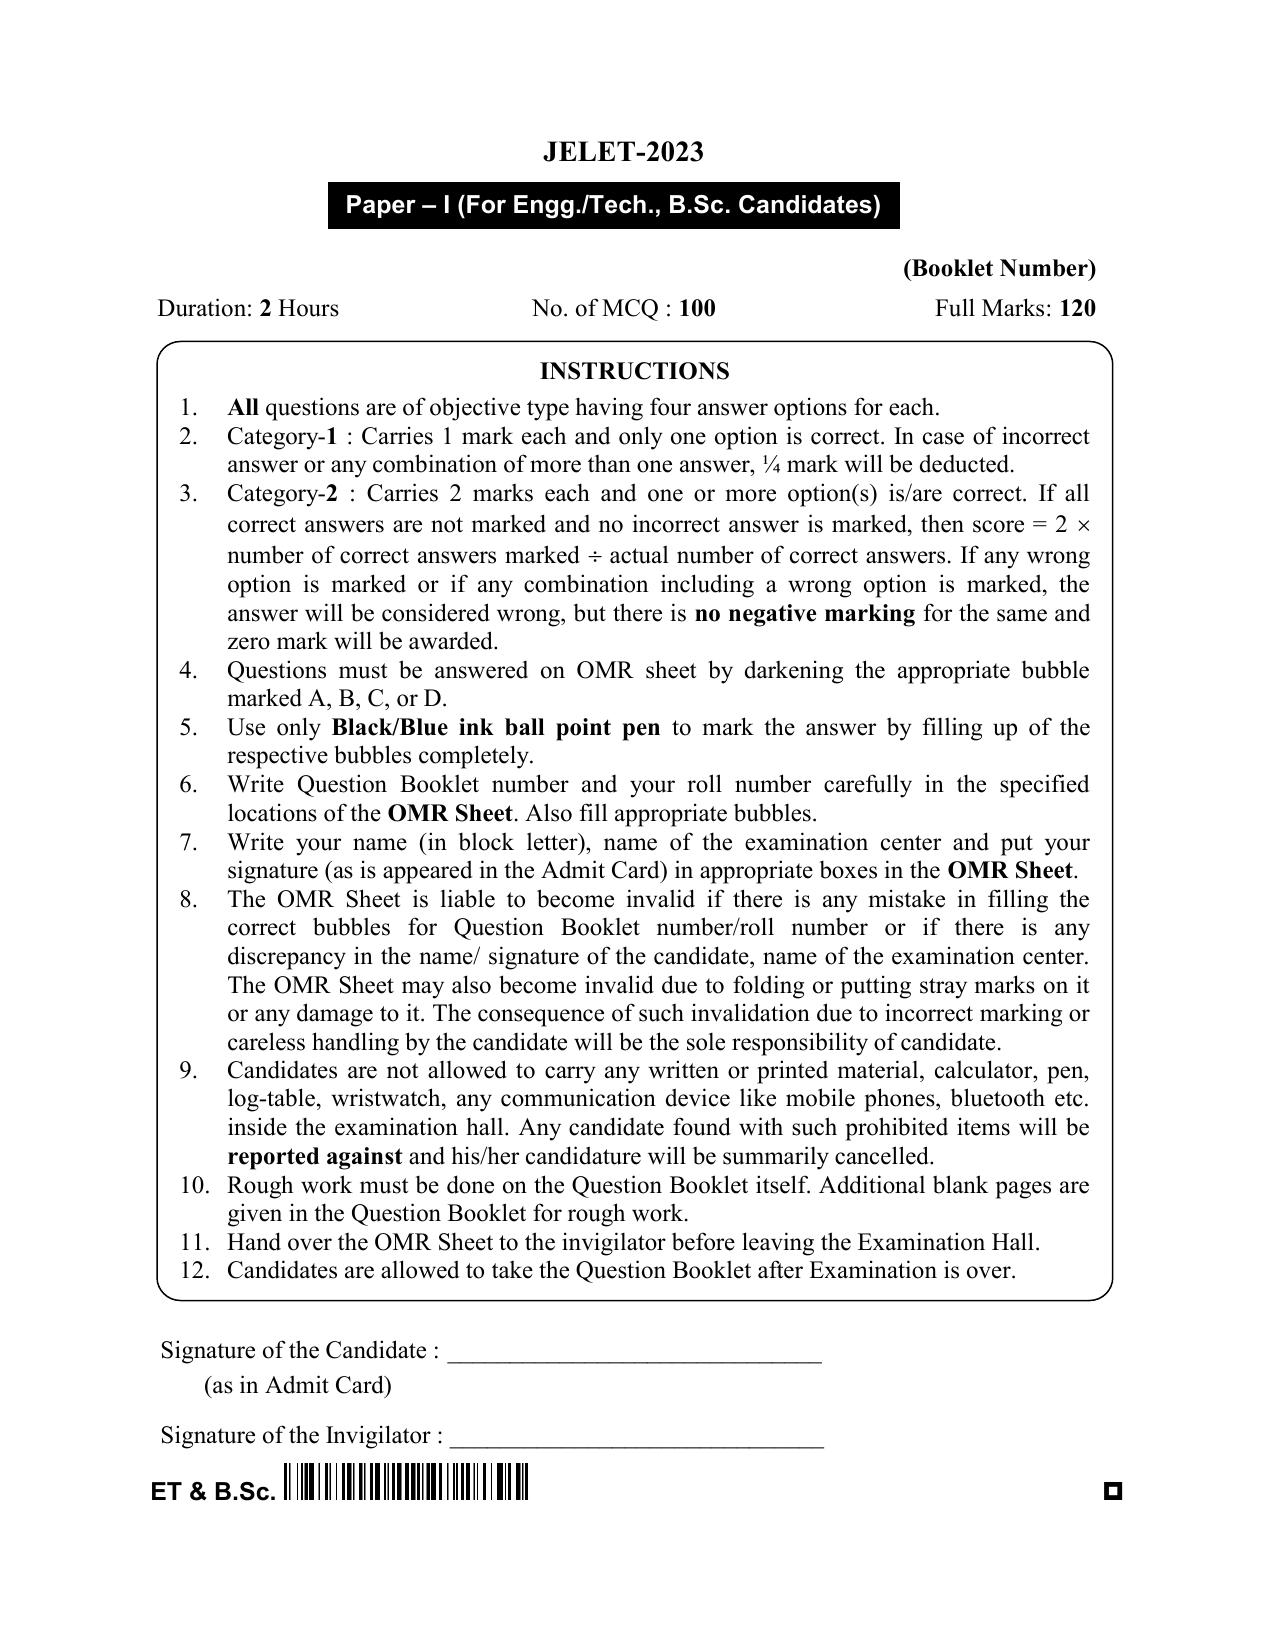 WBJEE JELET 2023 Paper I (ET & BSC) Question Papers - Page 1